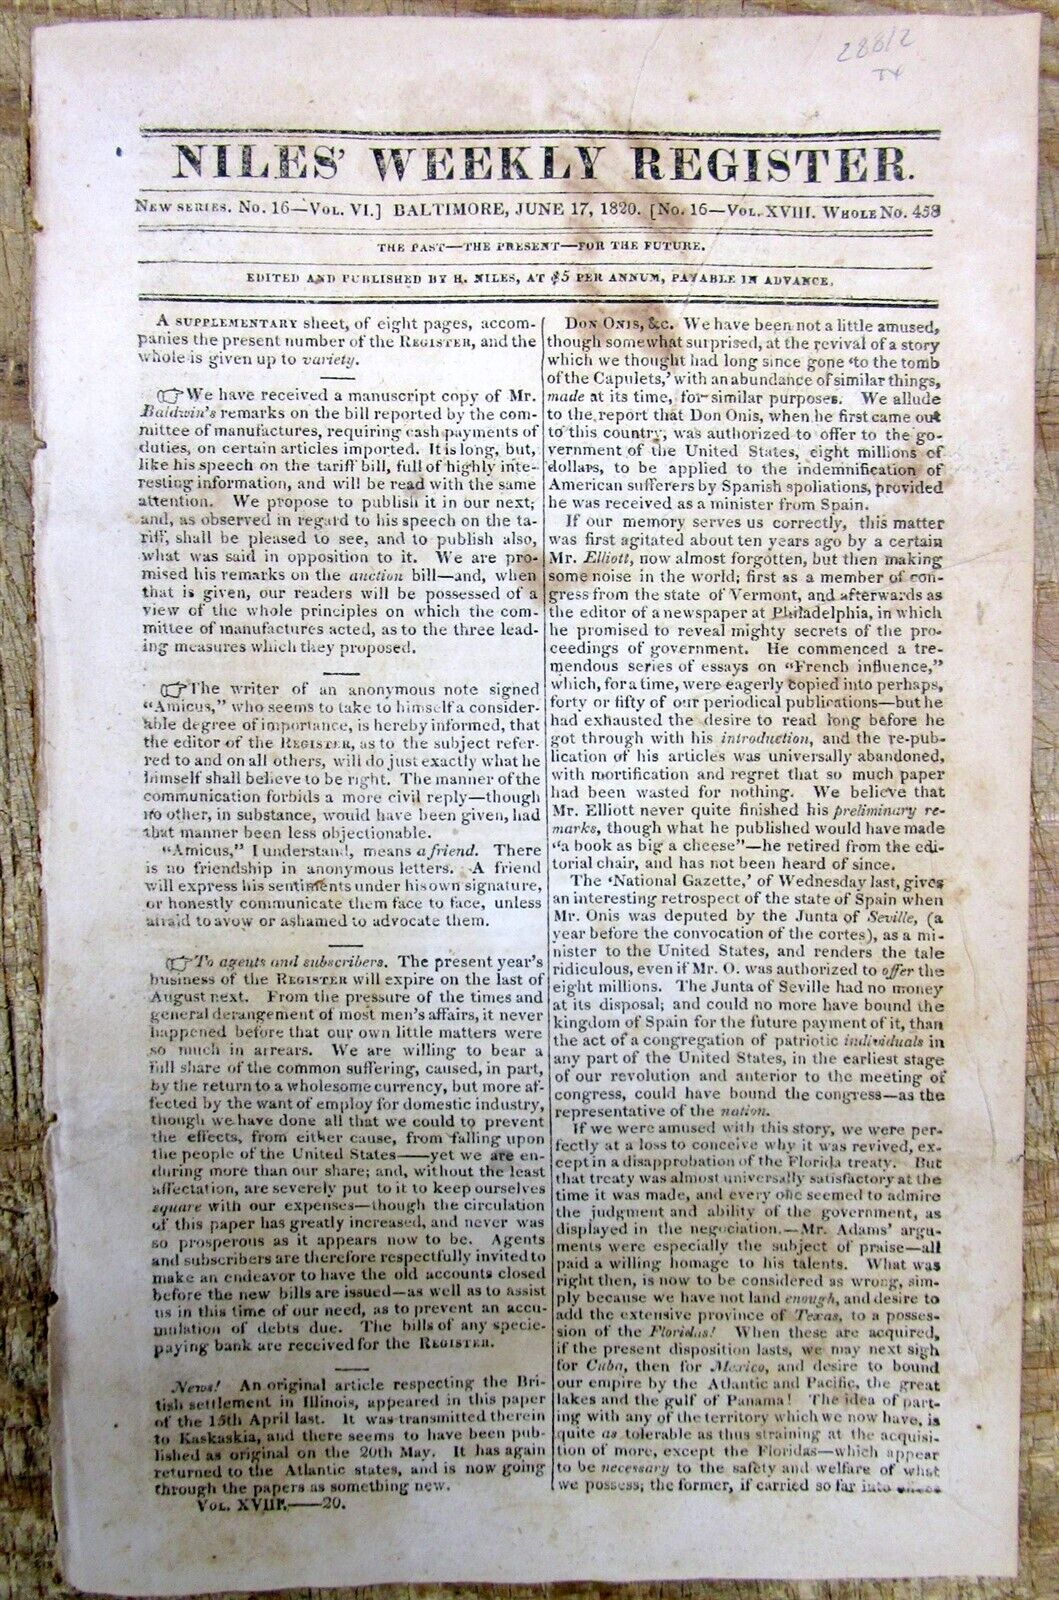 1820 newspaper wth earliest attempt by AMERICANS to SETTLE in Mexico-ruled TEXAS